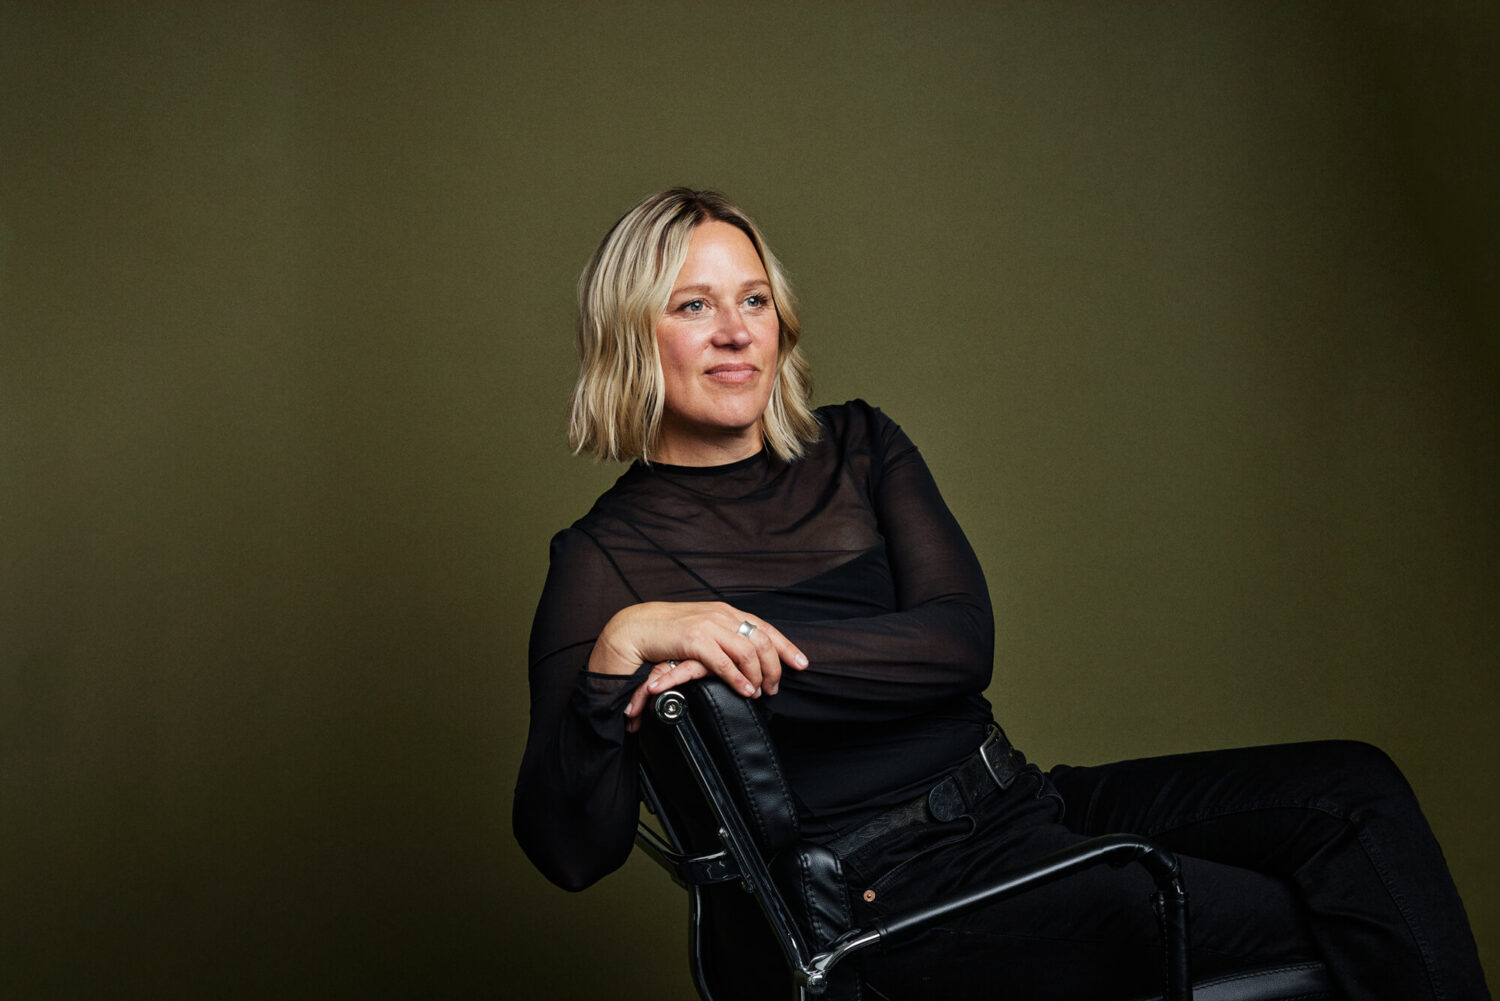 Portrait by Photoform*. Woman is looking to the right and she's sitting on a leather black chair.
She's wearing all black and has blonde hair.  She's against an olive coloured background/